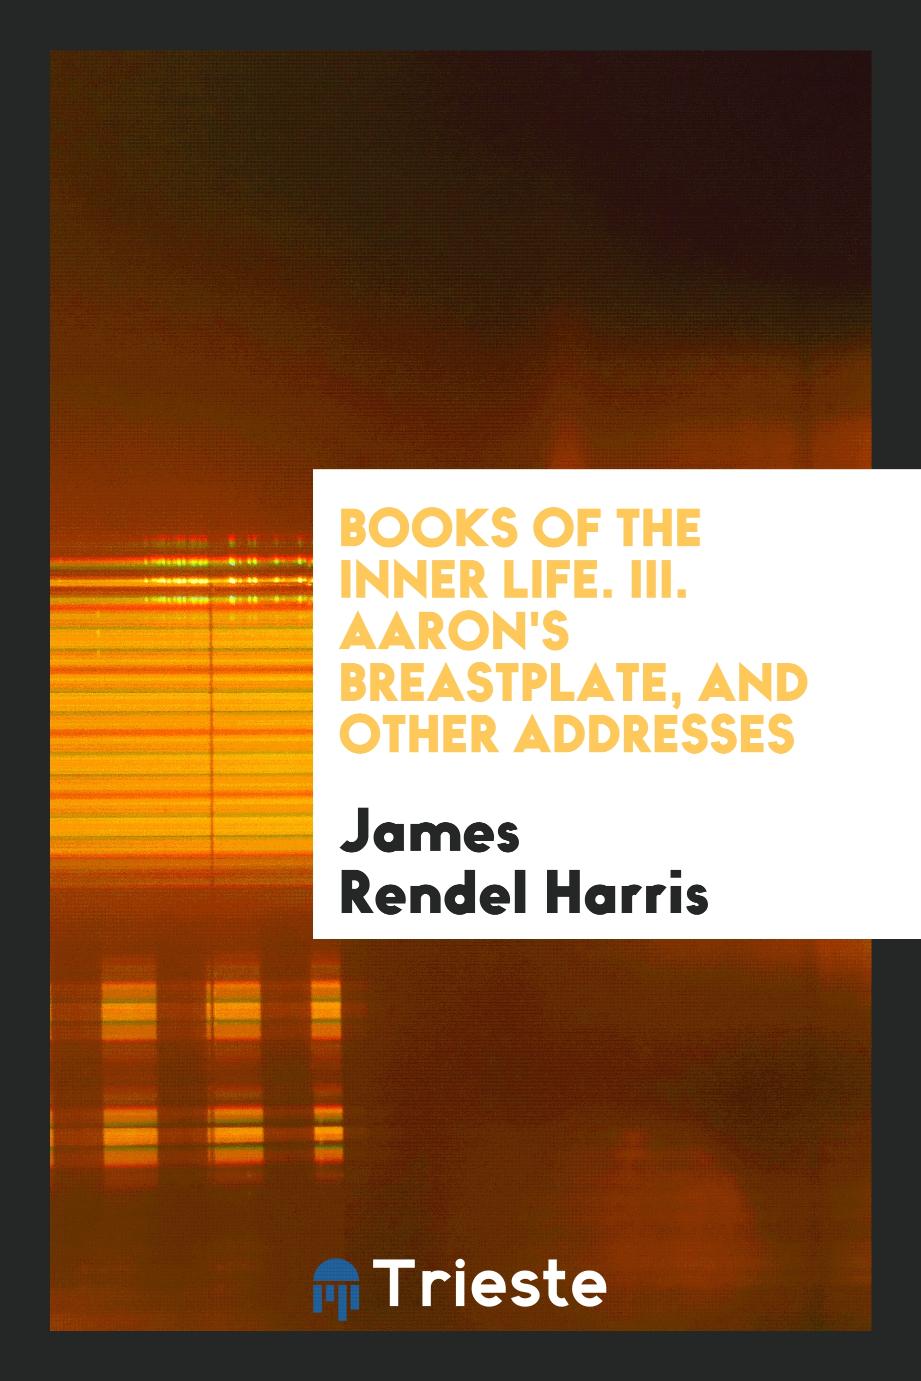 James Rendel Harris - Books of the Inner Life. III. Aaron's Breastplate, and Other Addresses